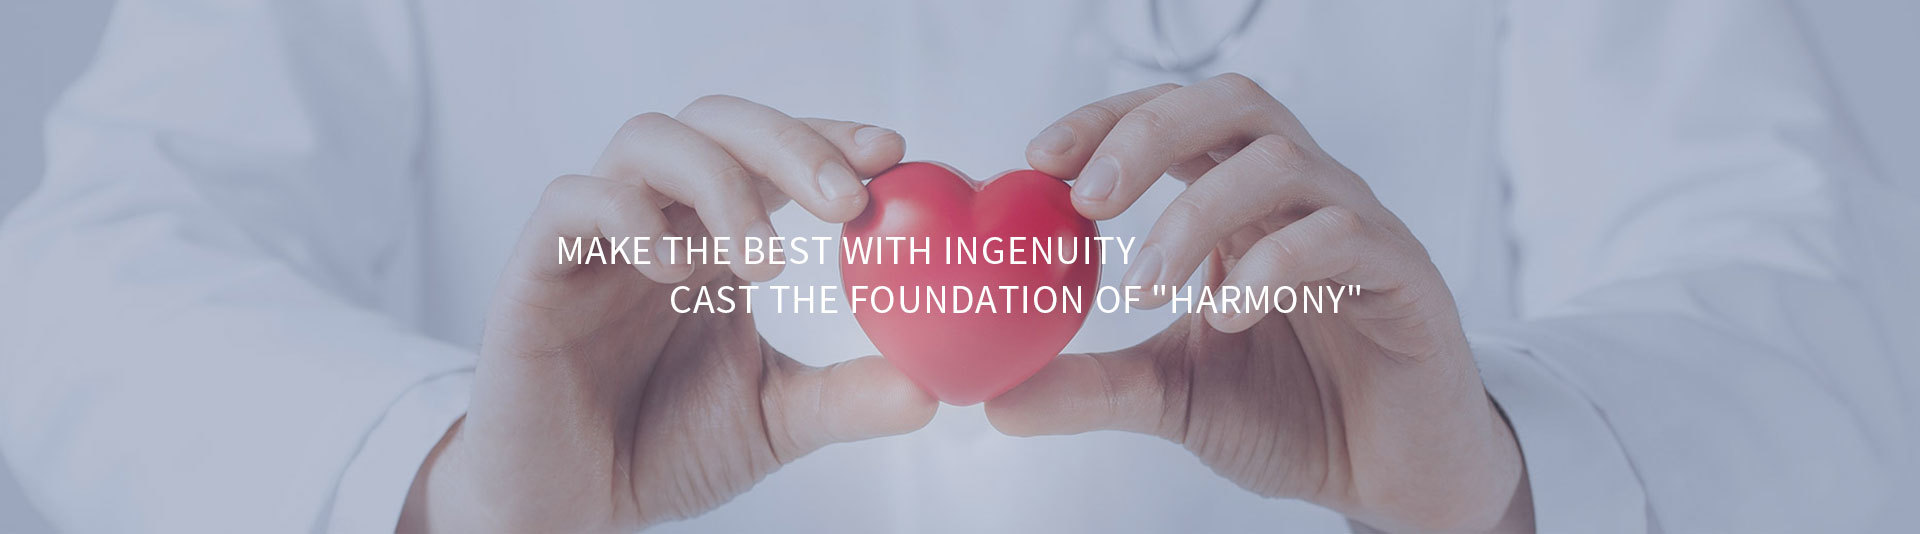 Make the best with ingenuity  Cast the foundation of 